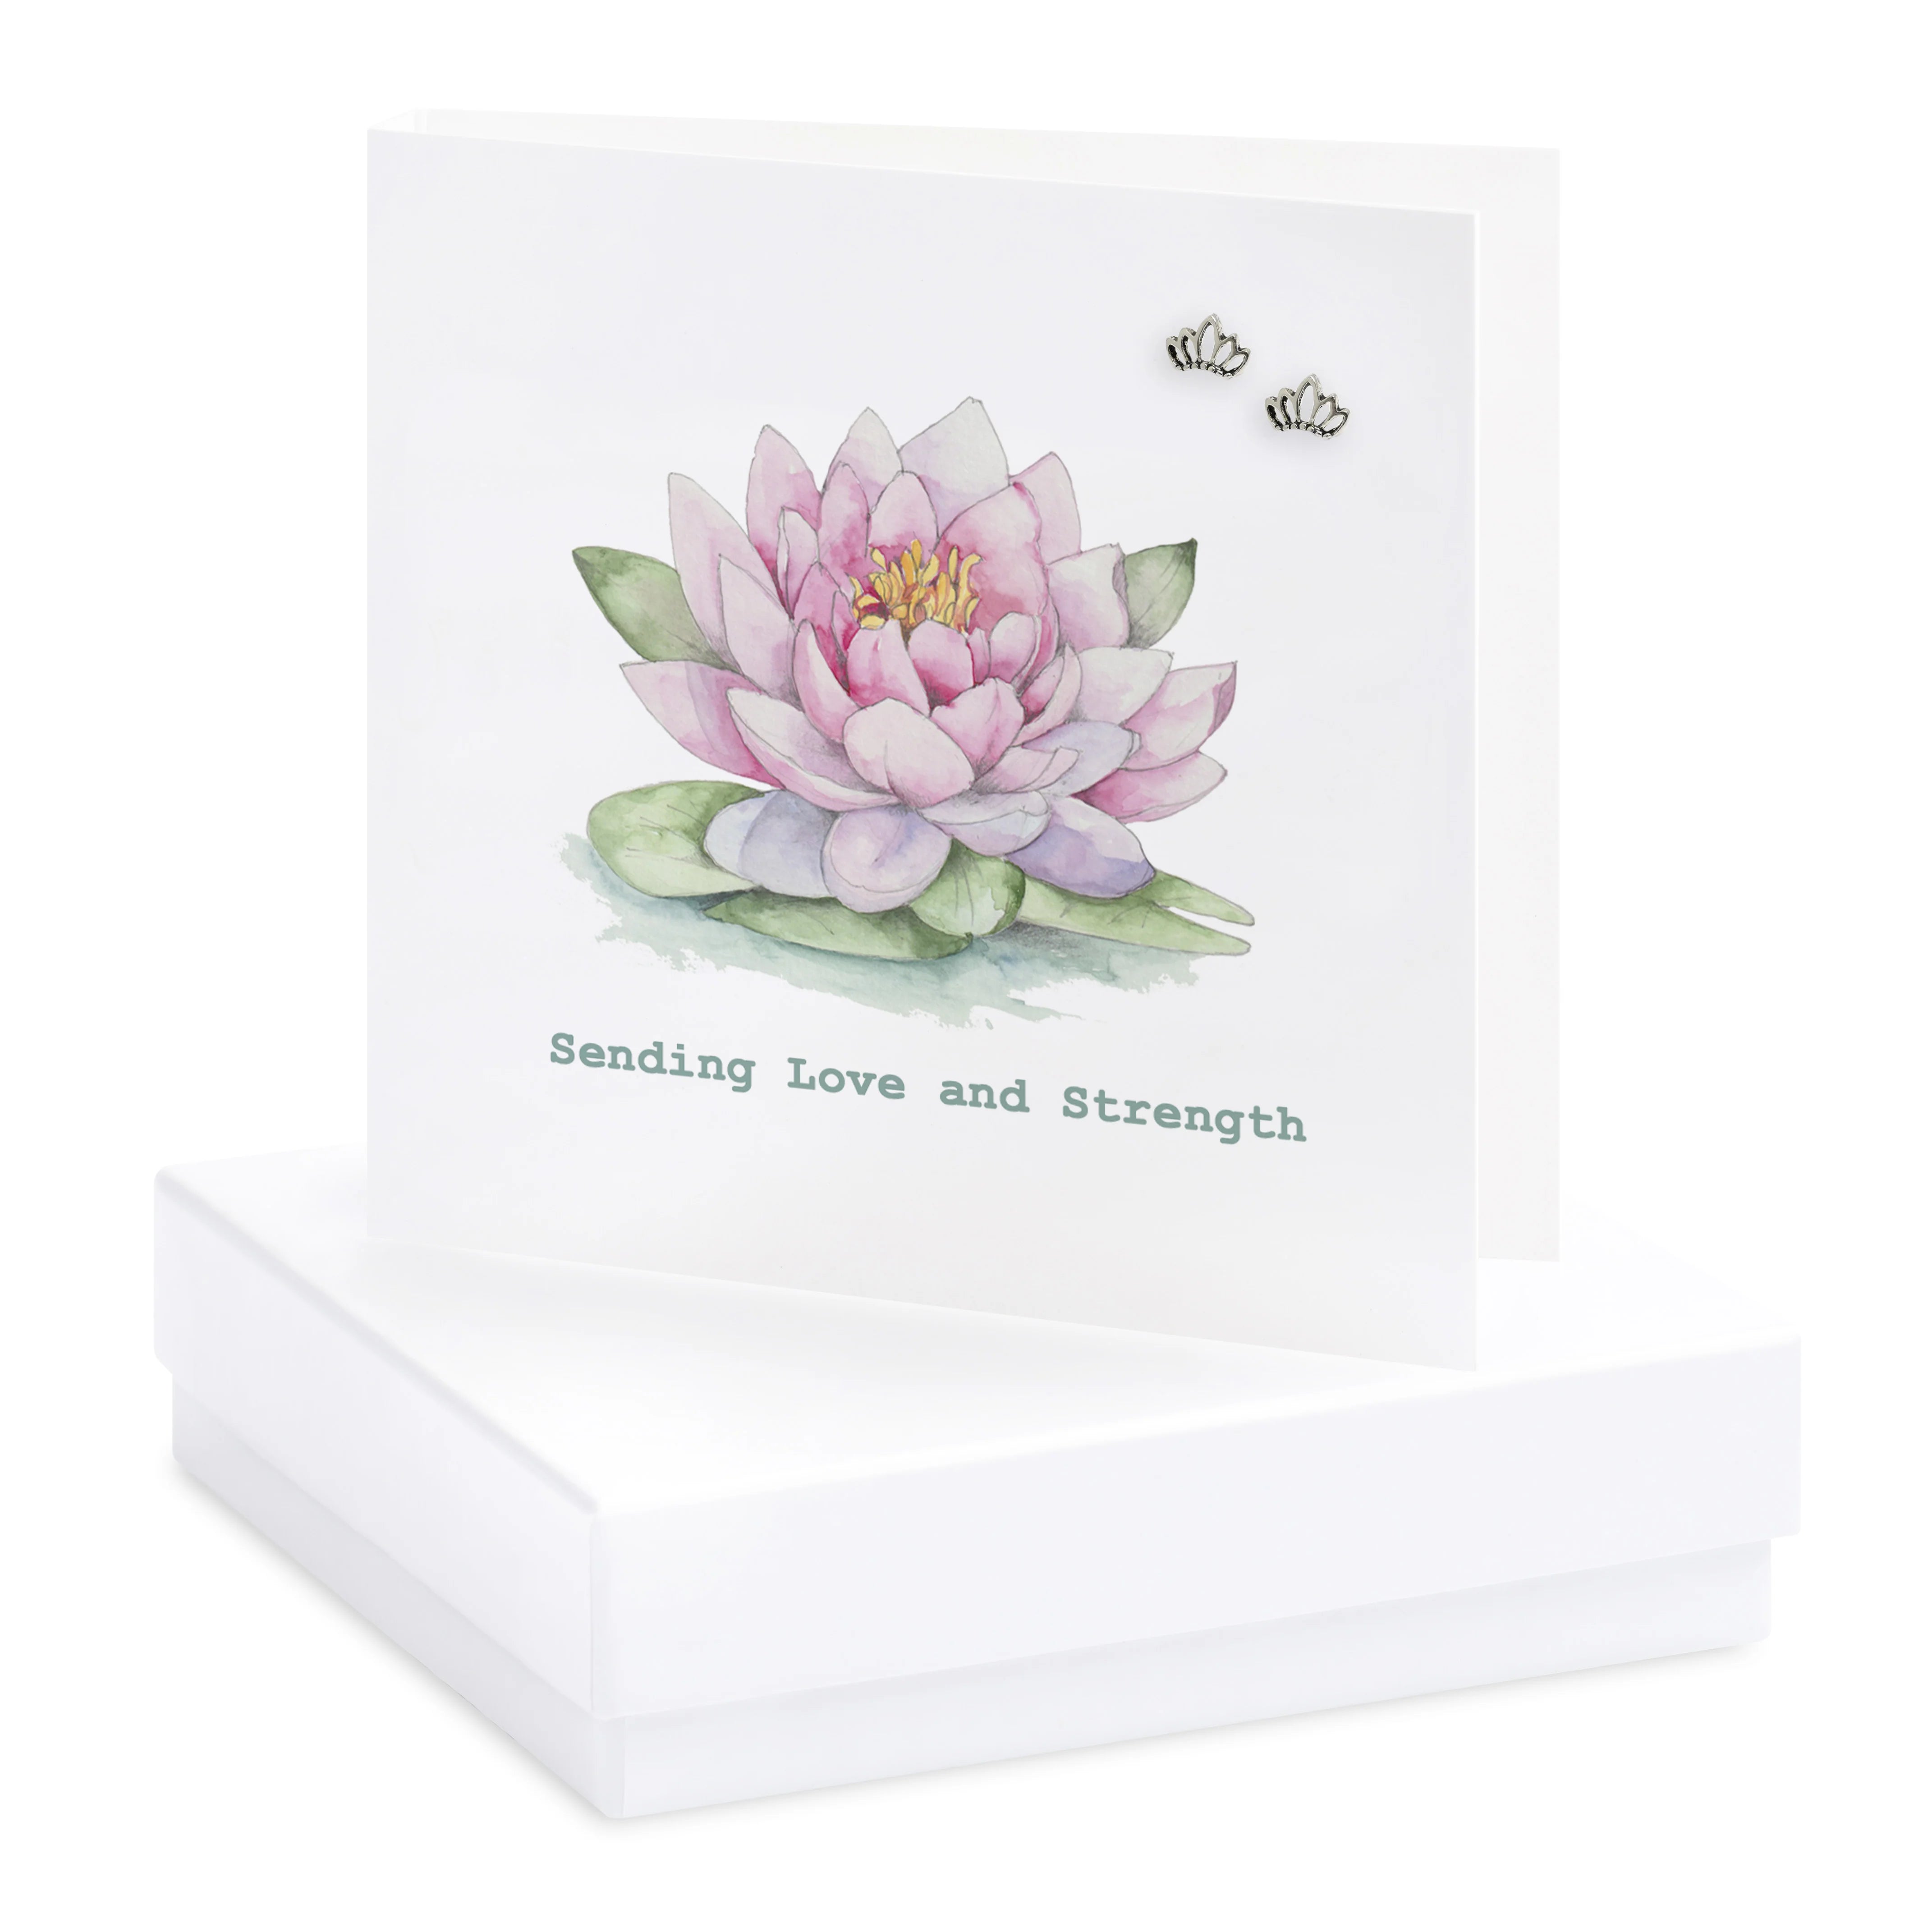 Fabulous Gifts Crumble & Core Box Lotus Flower Earring Card by Weirs of Baggot Street